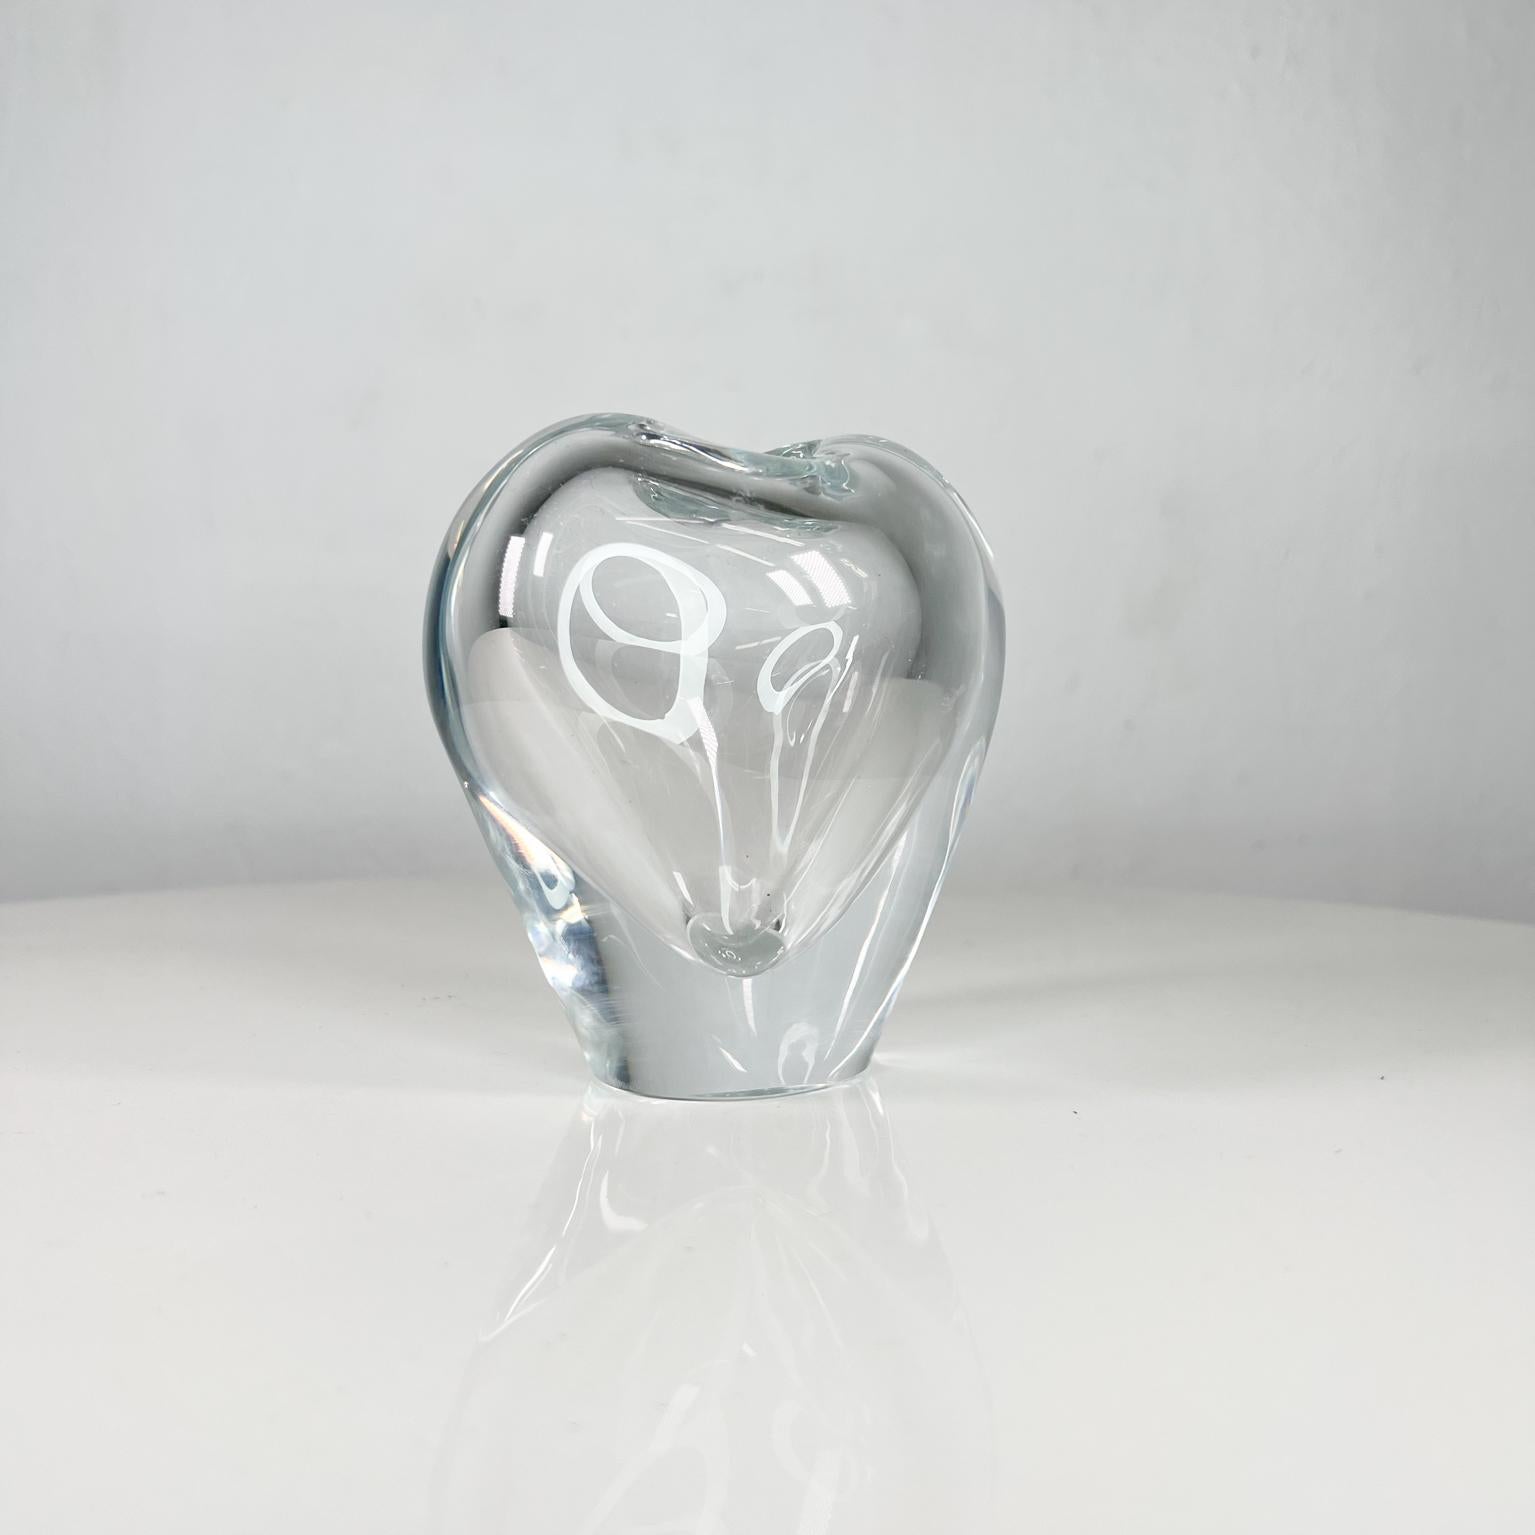 1960s Tiffany & Co Modern Heart vase Murano Art Glass ITALY
Lovely heart shaped hand-blown Venetian Glass 
Made in Italy by Salviati for Tiffany & Co
Etched signature at bottom
4.5 tall x 4.25 w x 3 d
Preowned original vintage condition
Refer